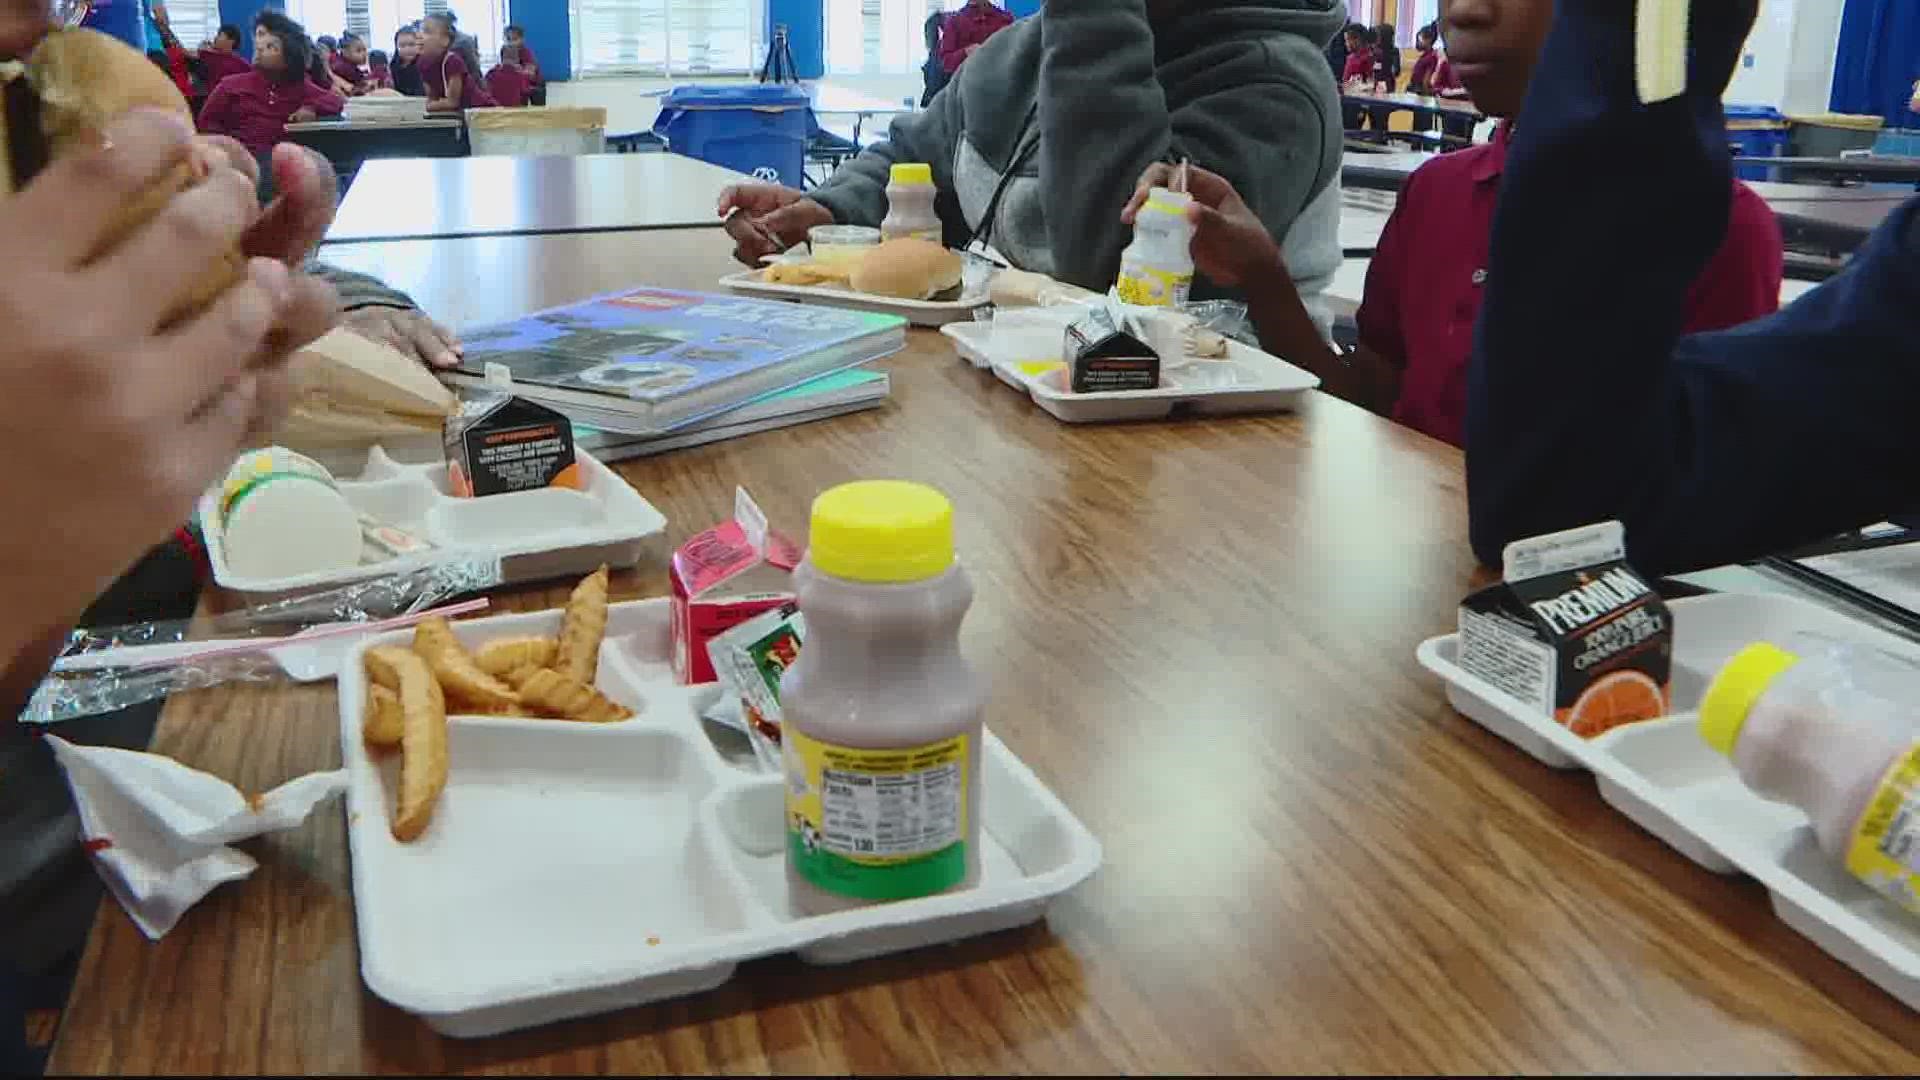 Some say the need for free meals is increasing even as the free lunch waivers are going away.